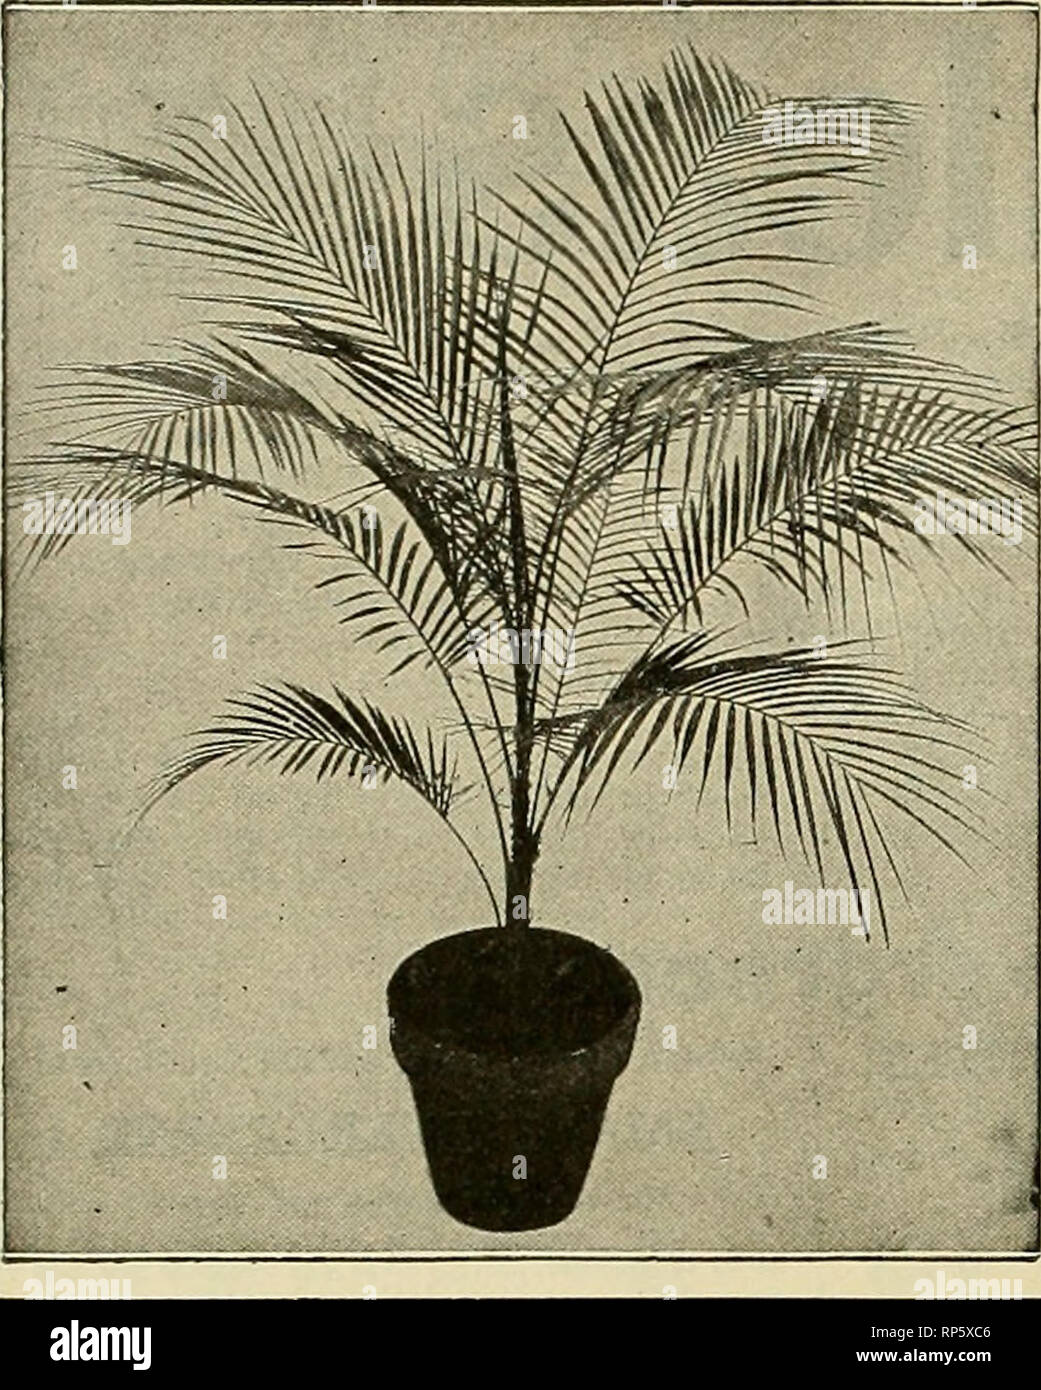 . The American florist : a weekly journal for the trade. Floriculture; Florists. 846 The American Florist. Nov. I J,. Cocos Weddelliana We are sending out at the present time a splendid lot of Cocos Weddelliana, in 5-inch pots, at $1.00 each, perfect stock, of a rich dark green color, 18 to 24 inches high, just the sort of plants to appeal to your customer for house decoration. May We Send You a Trial Lot of These? For a full and complete list of Seasonable, Dccorative and other stock, see our current wholesale list. HENRY A. DREER 714 Chestnut St., PHILADELPHIA, PA. Arbor Vitse (Thnya Occiden Stock Photo